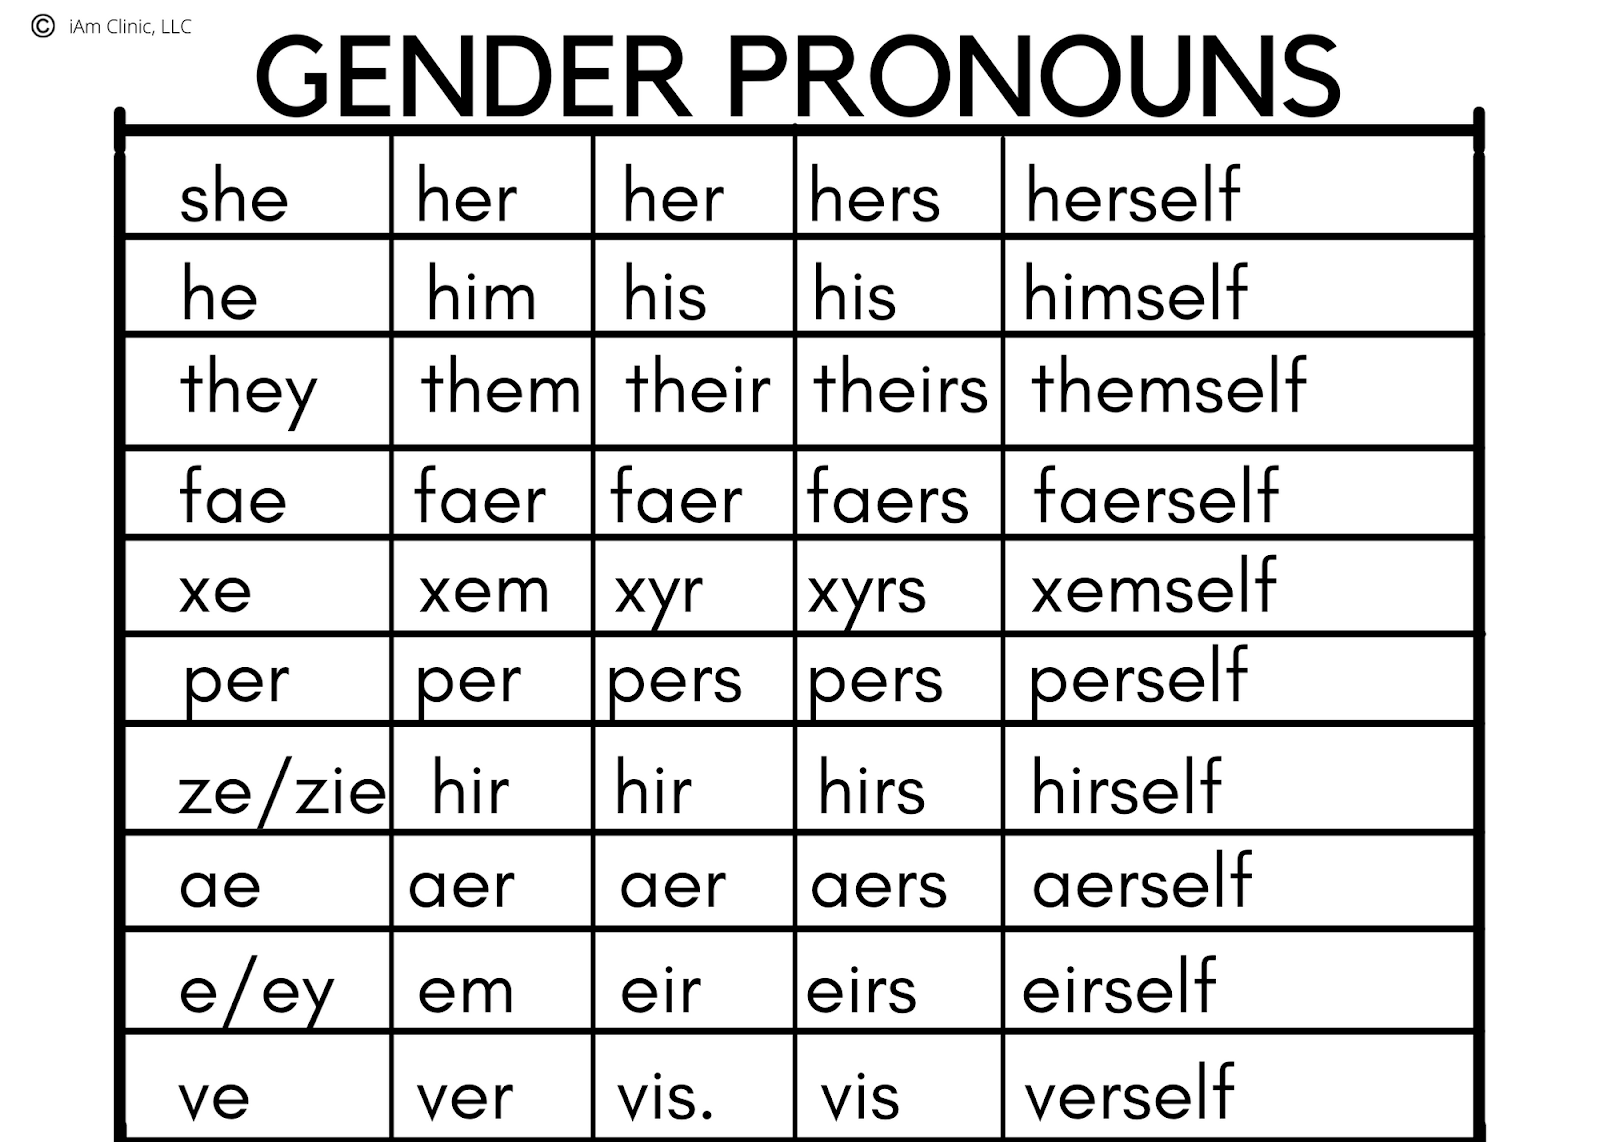 what are pronouns gender